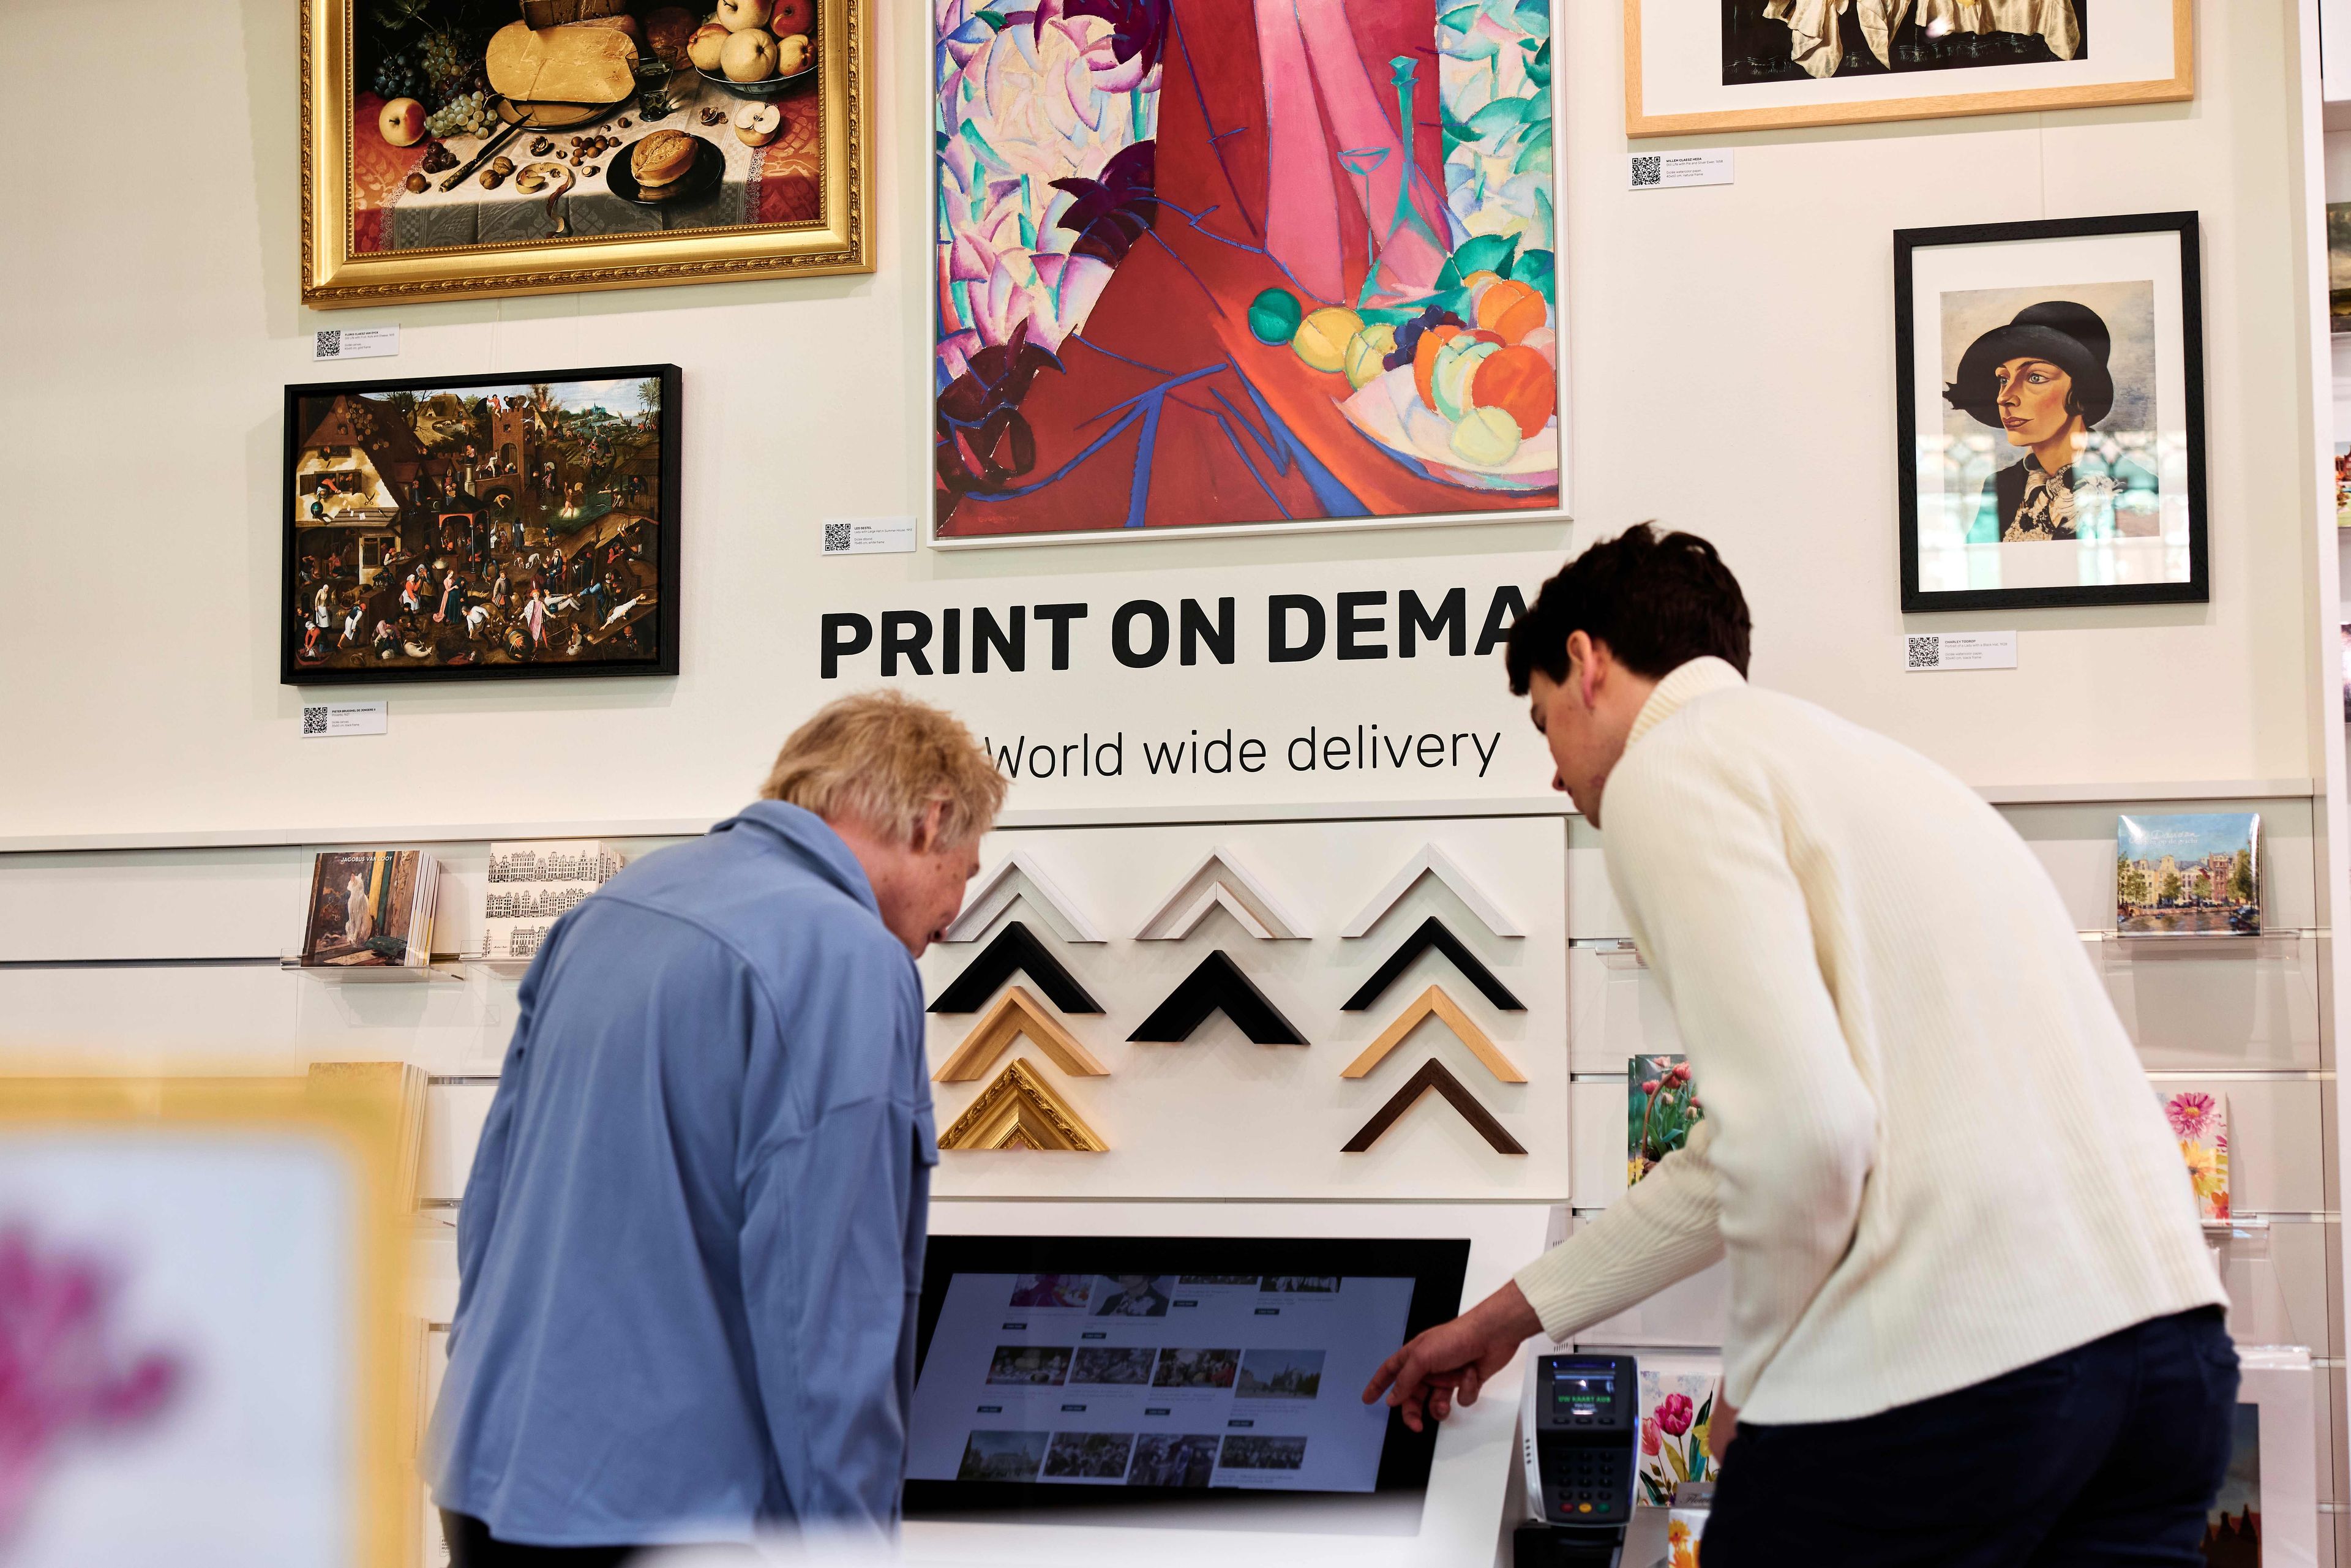 Two visitors checking out the print-on-demand option at the museum shop.